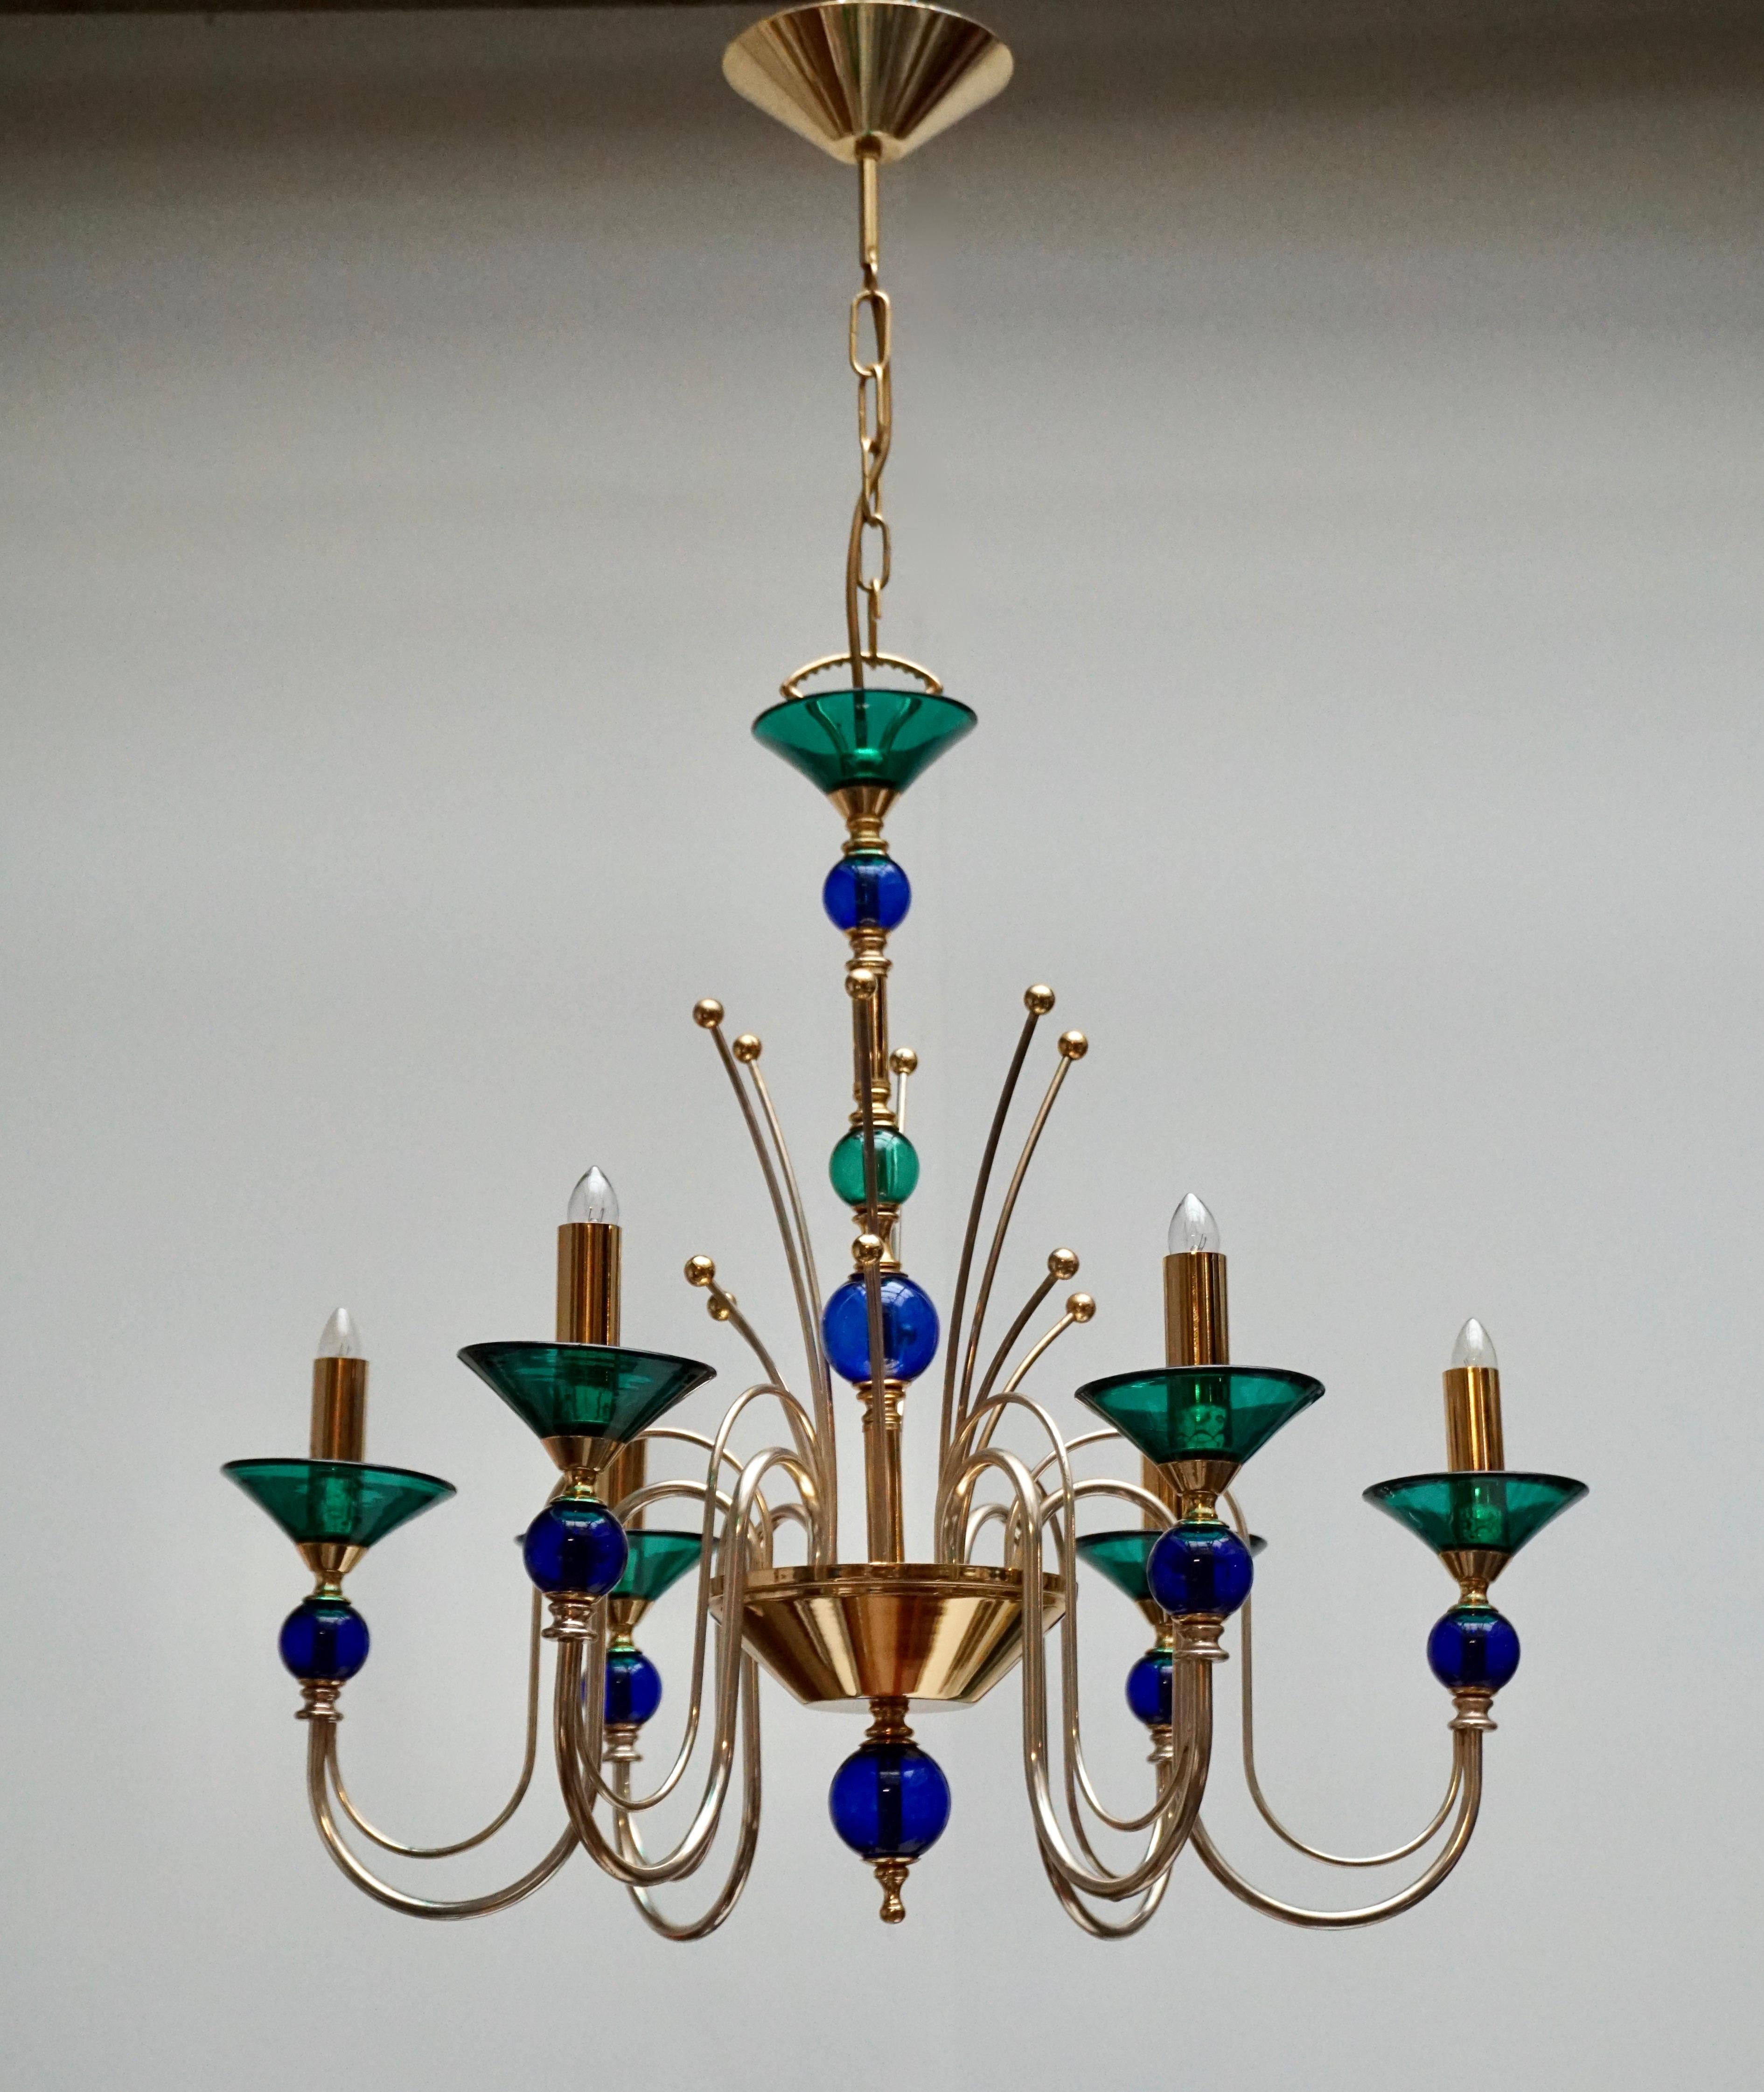 Italian Murano glass and brass six-arm chandelier. The light created by this chandelier is very pleasant and ambient.
The light requires six single E14 screw fit lightbulbs (60Watt max.) LED compatible.

Measures: Diameter 68 cm.
Height fixture 64